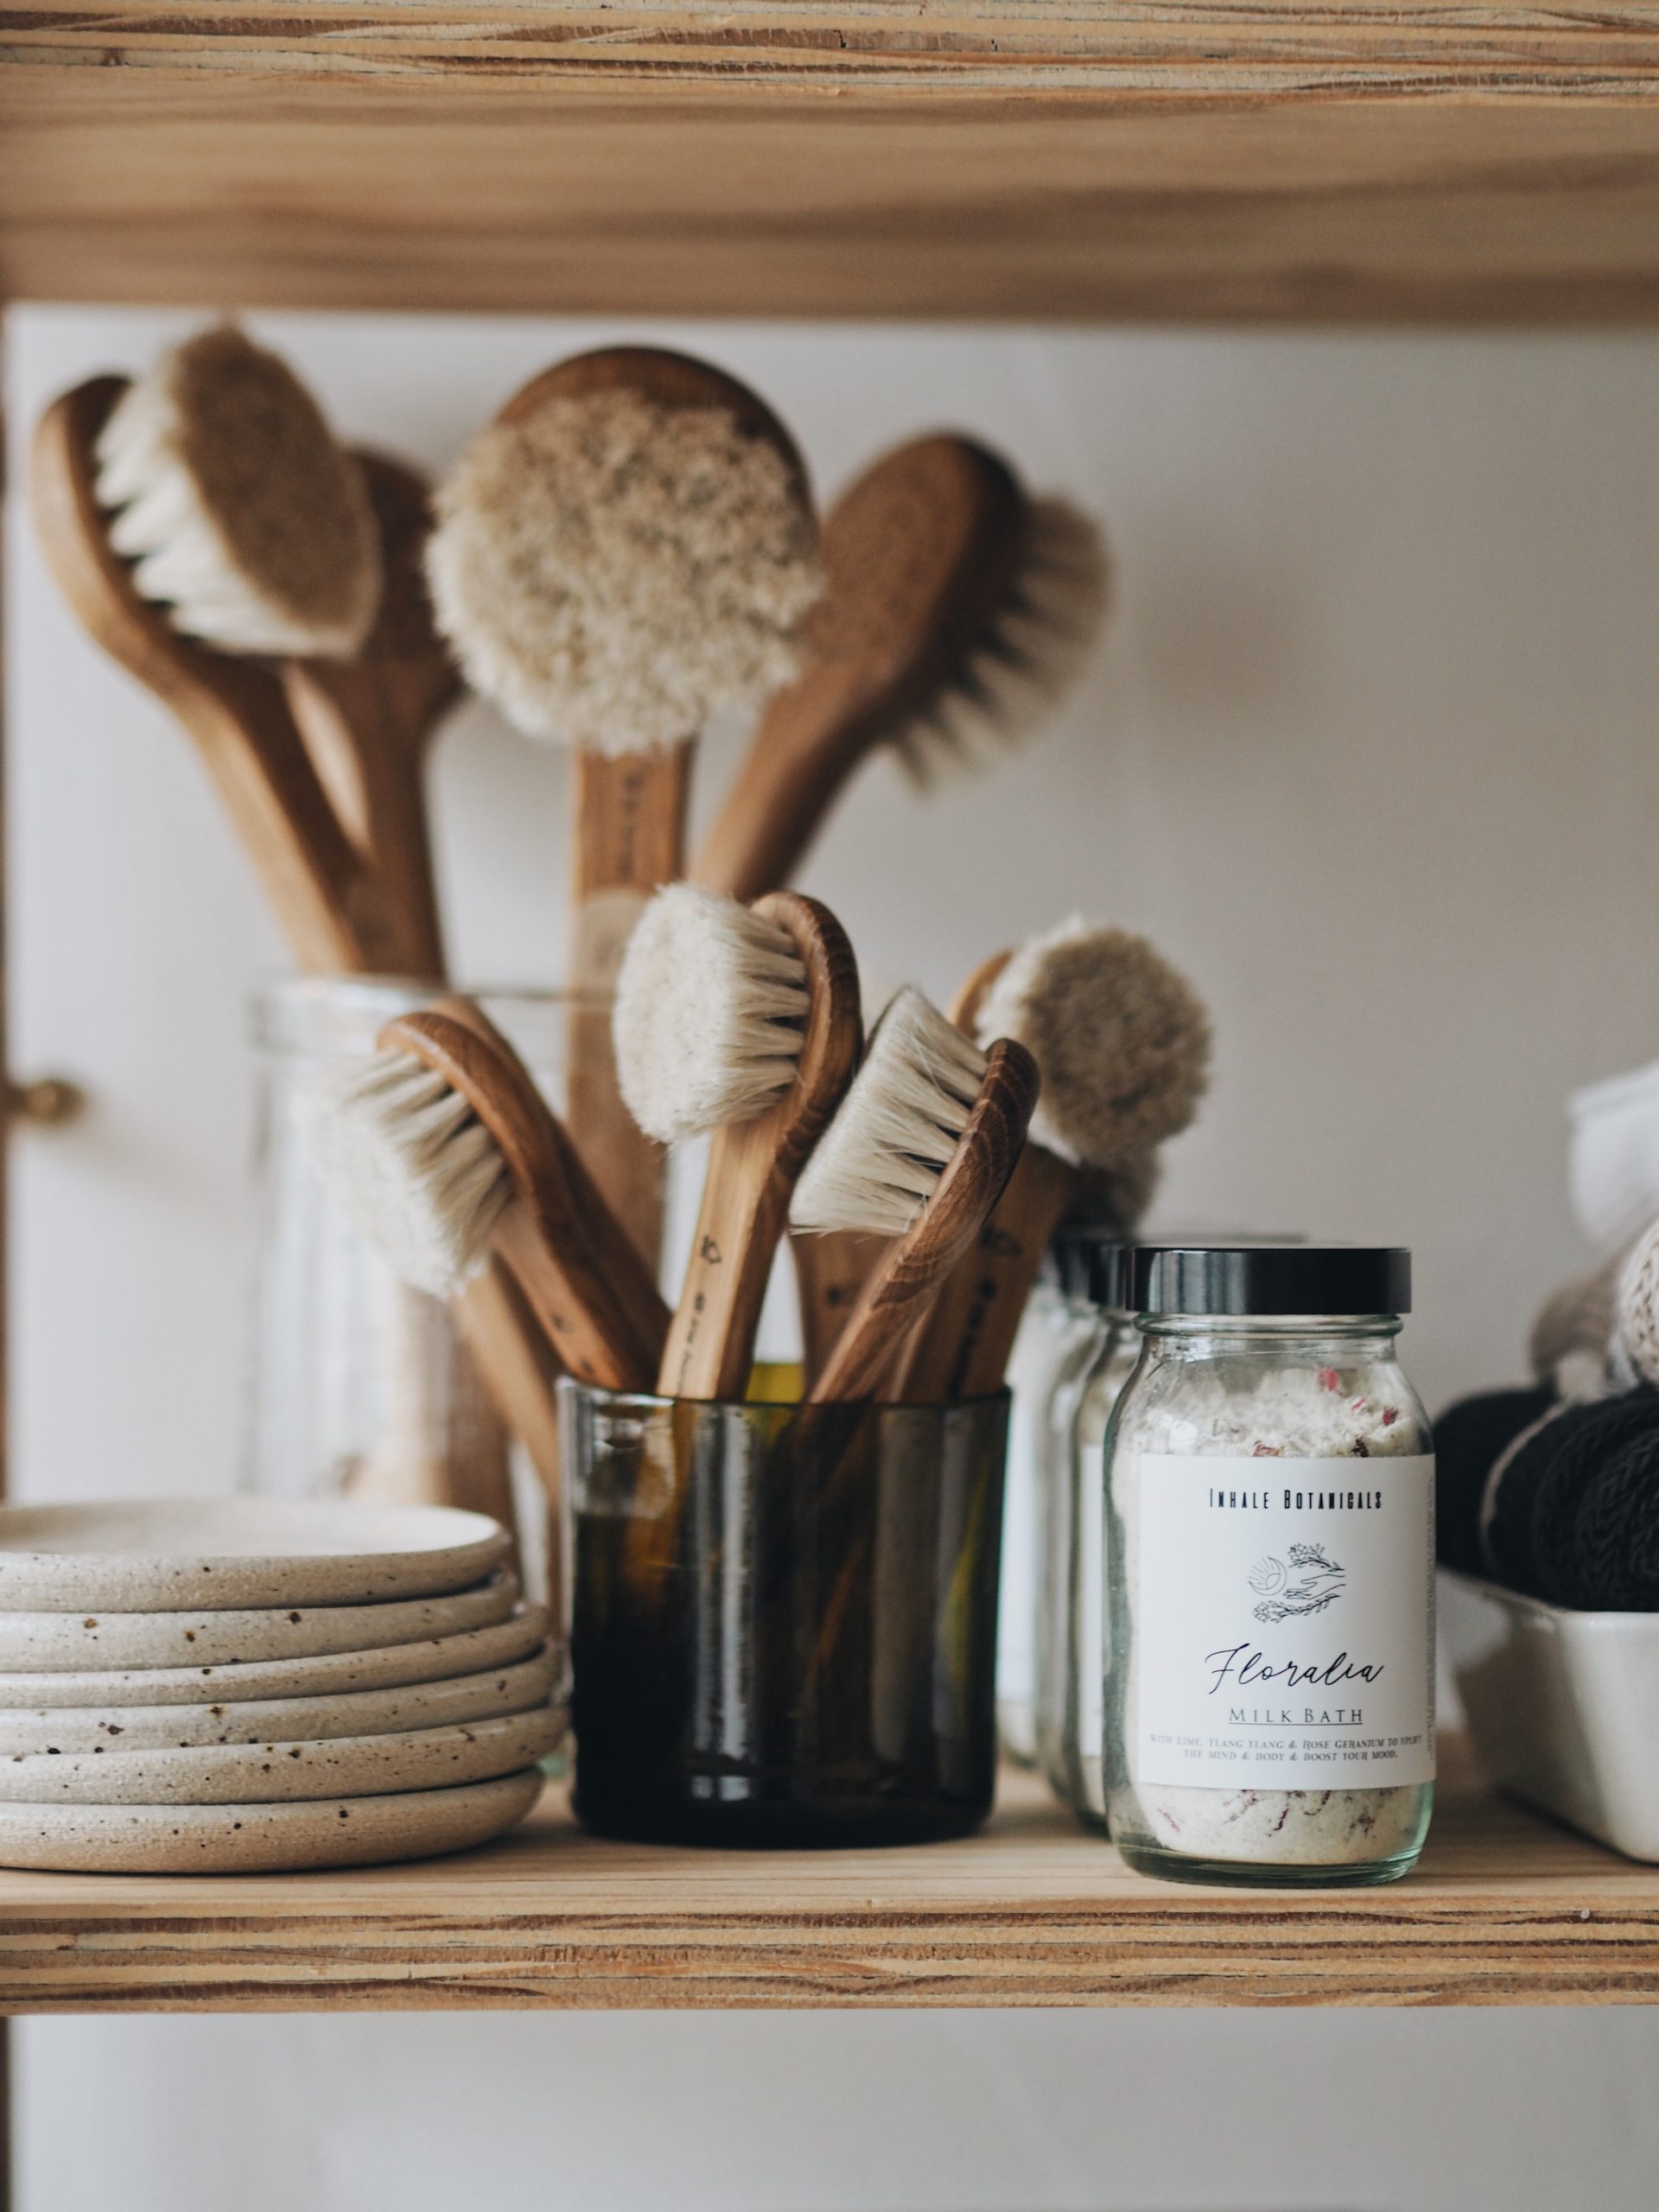 Natural cleaning products inside The Botanical Candle Co. in Shaftesbury, Dorset